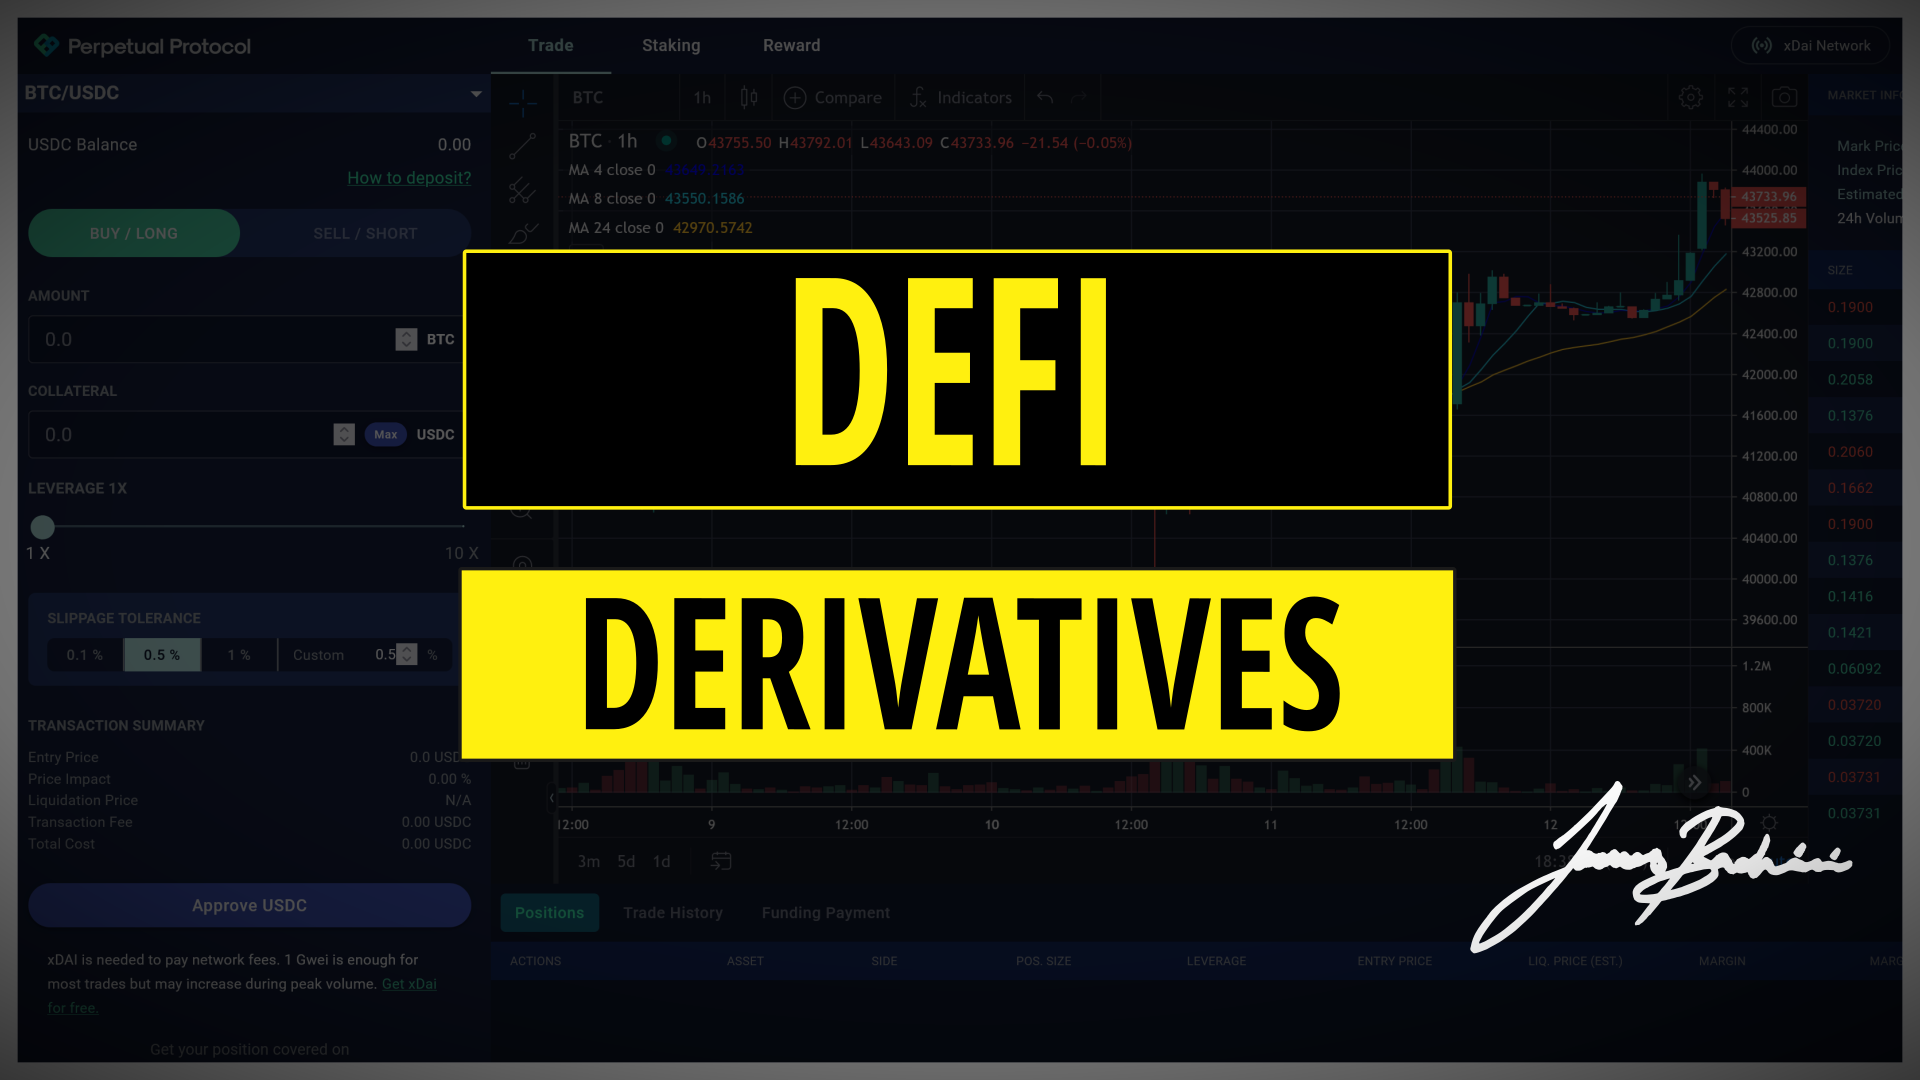 DeFi Derivatives | The 13 Market Leading DeFi Futures, Options, Synths, Indexes & Staking Protocols